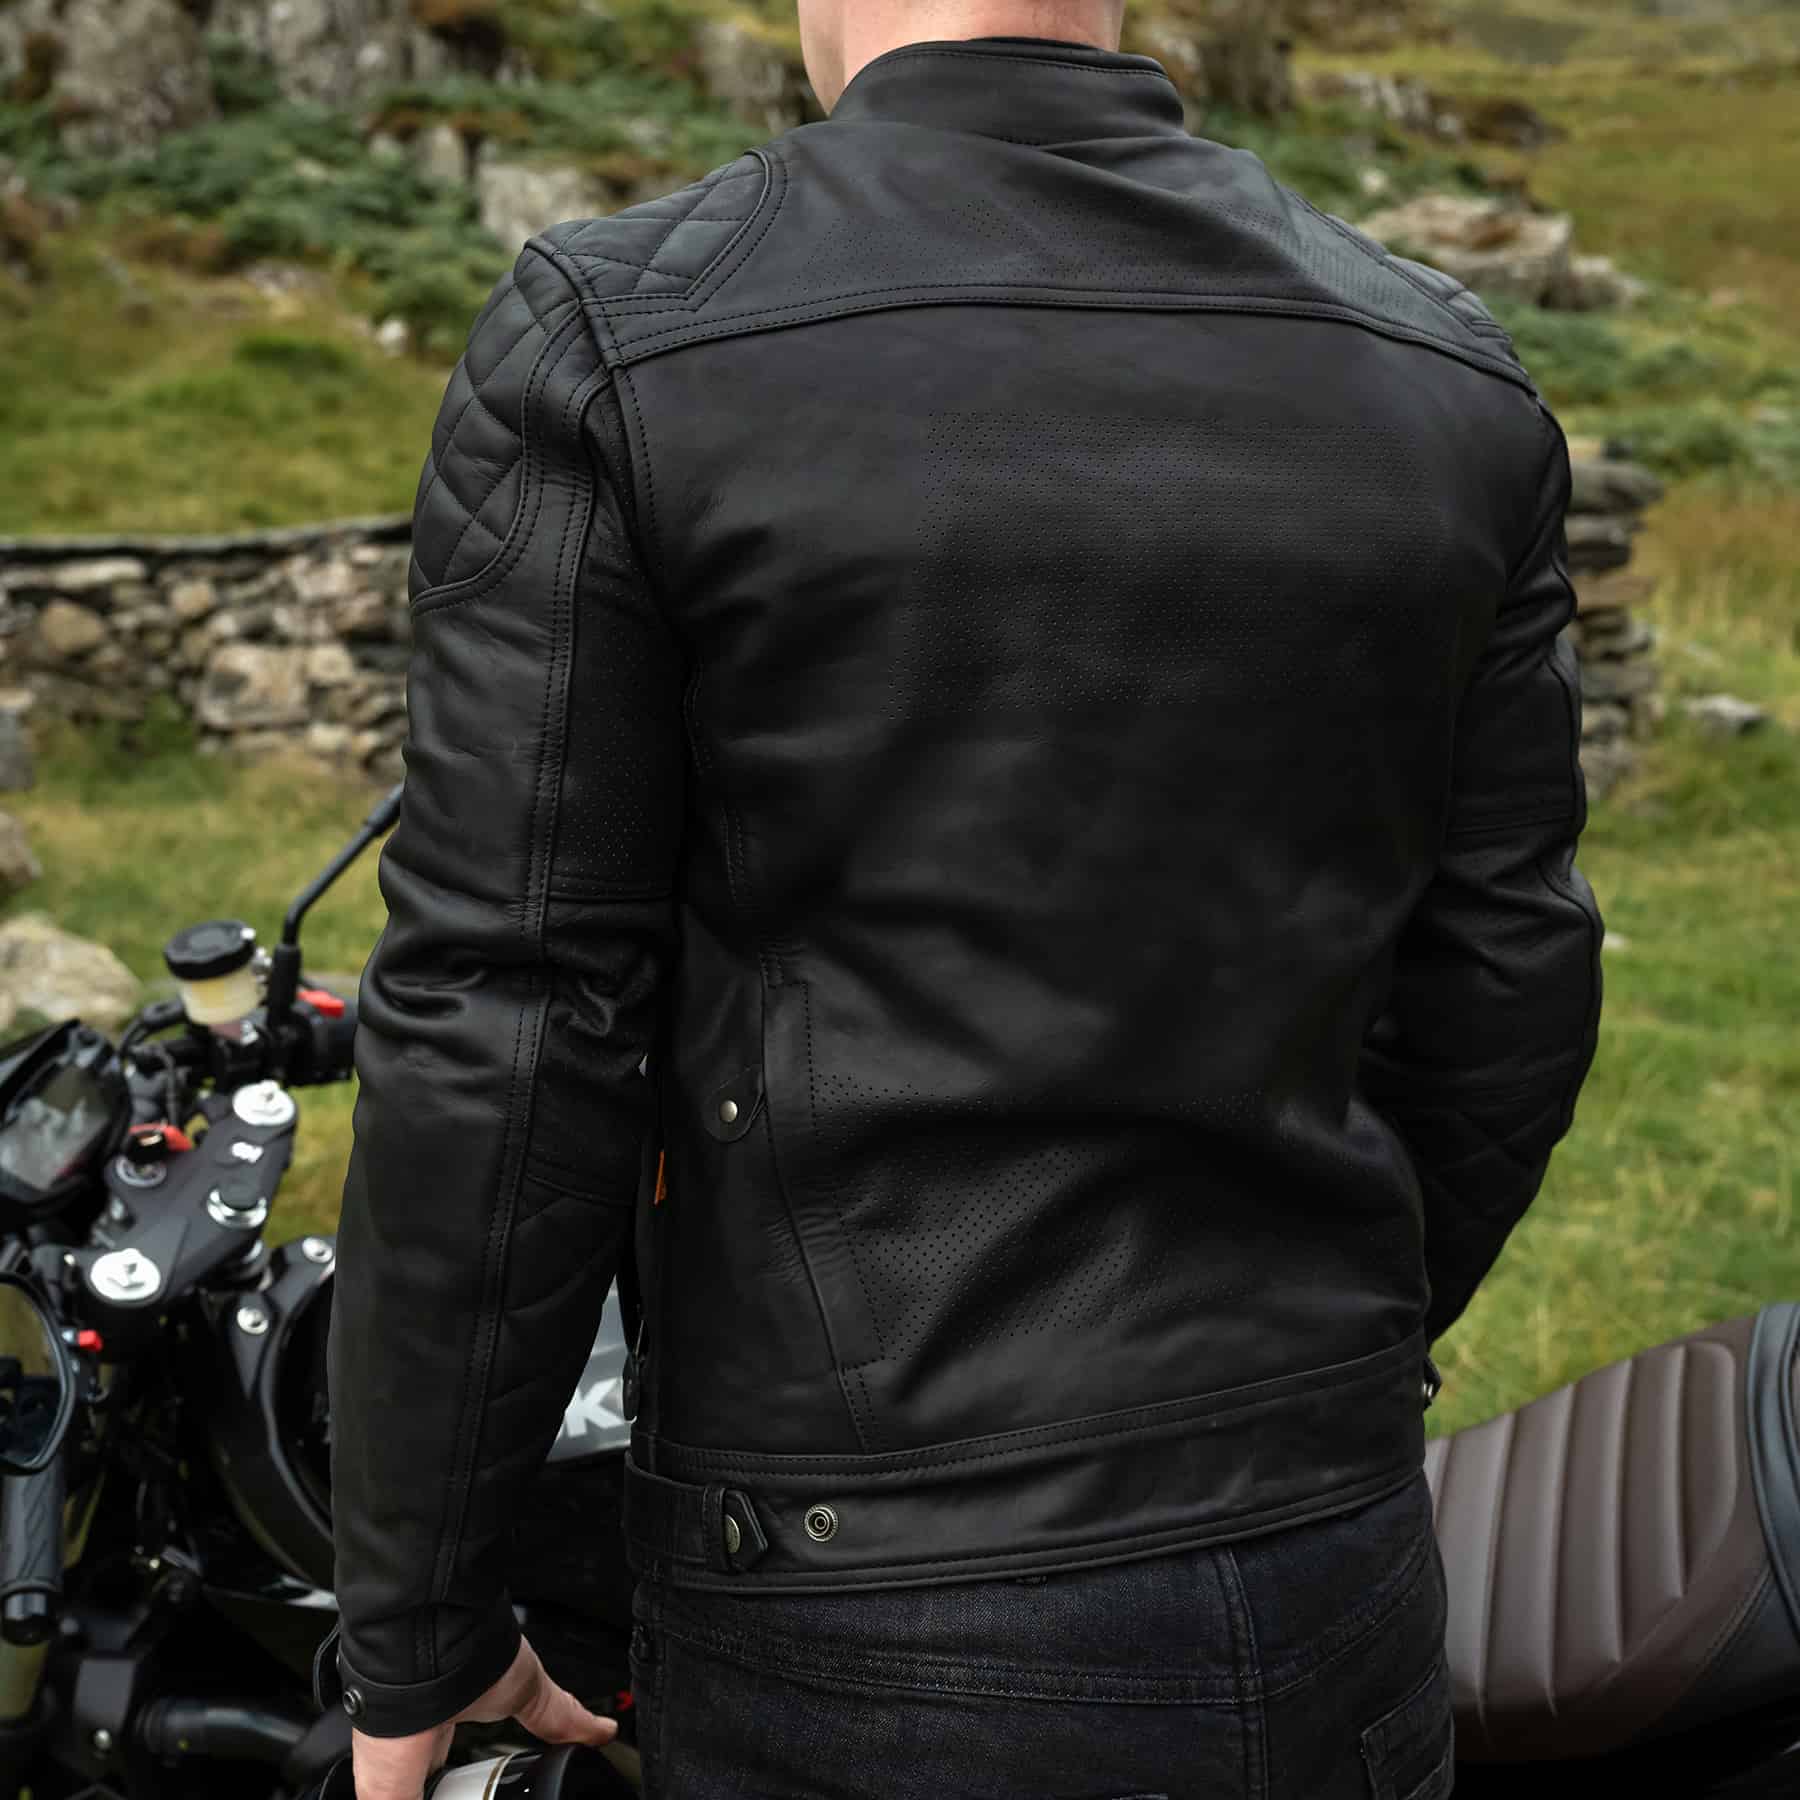 Merlin Cambrian leather jacket in black detail